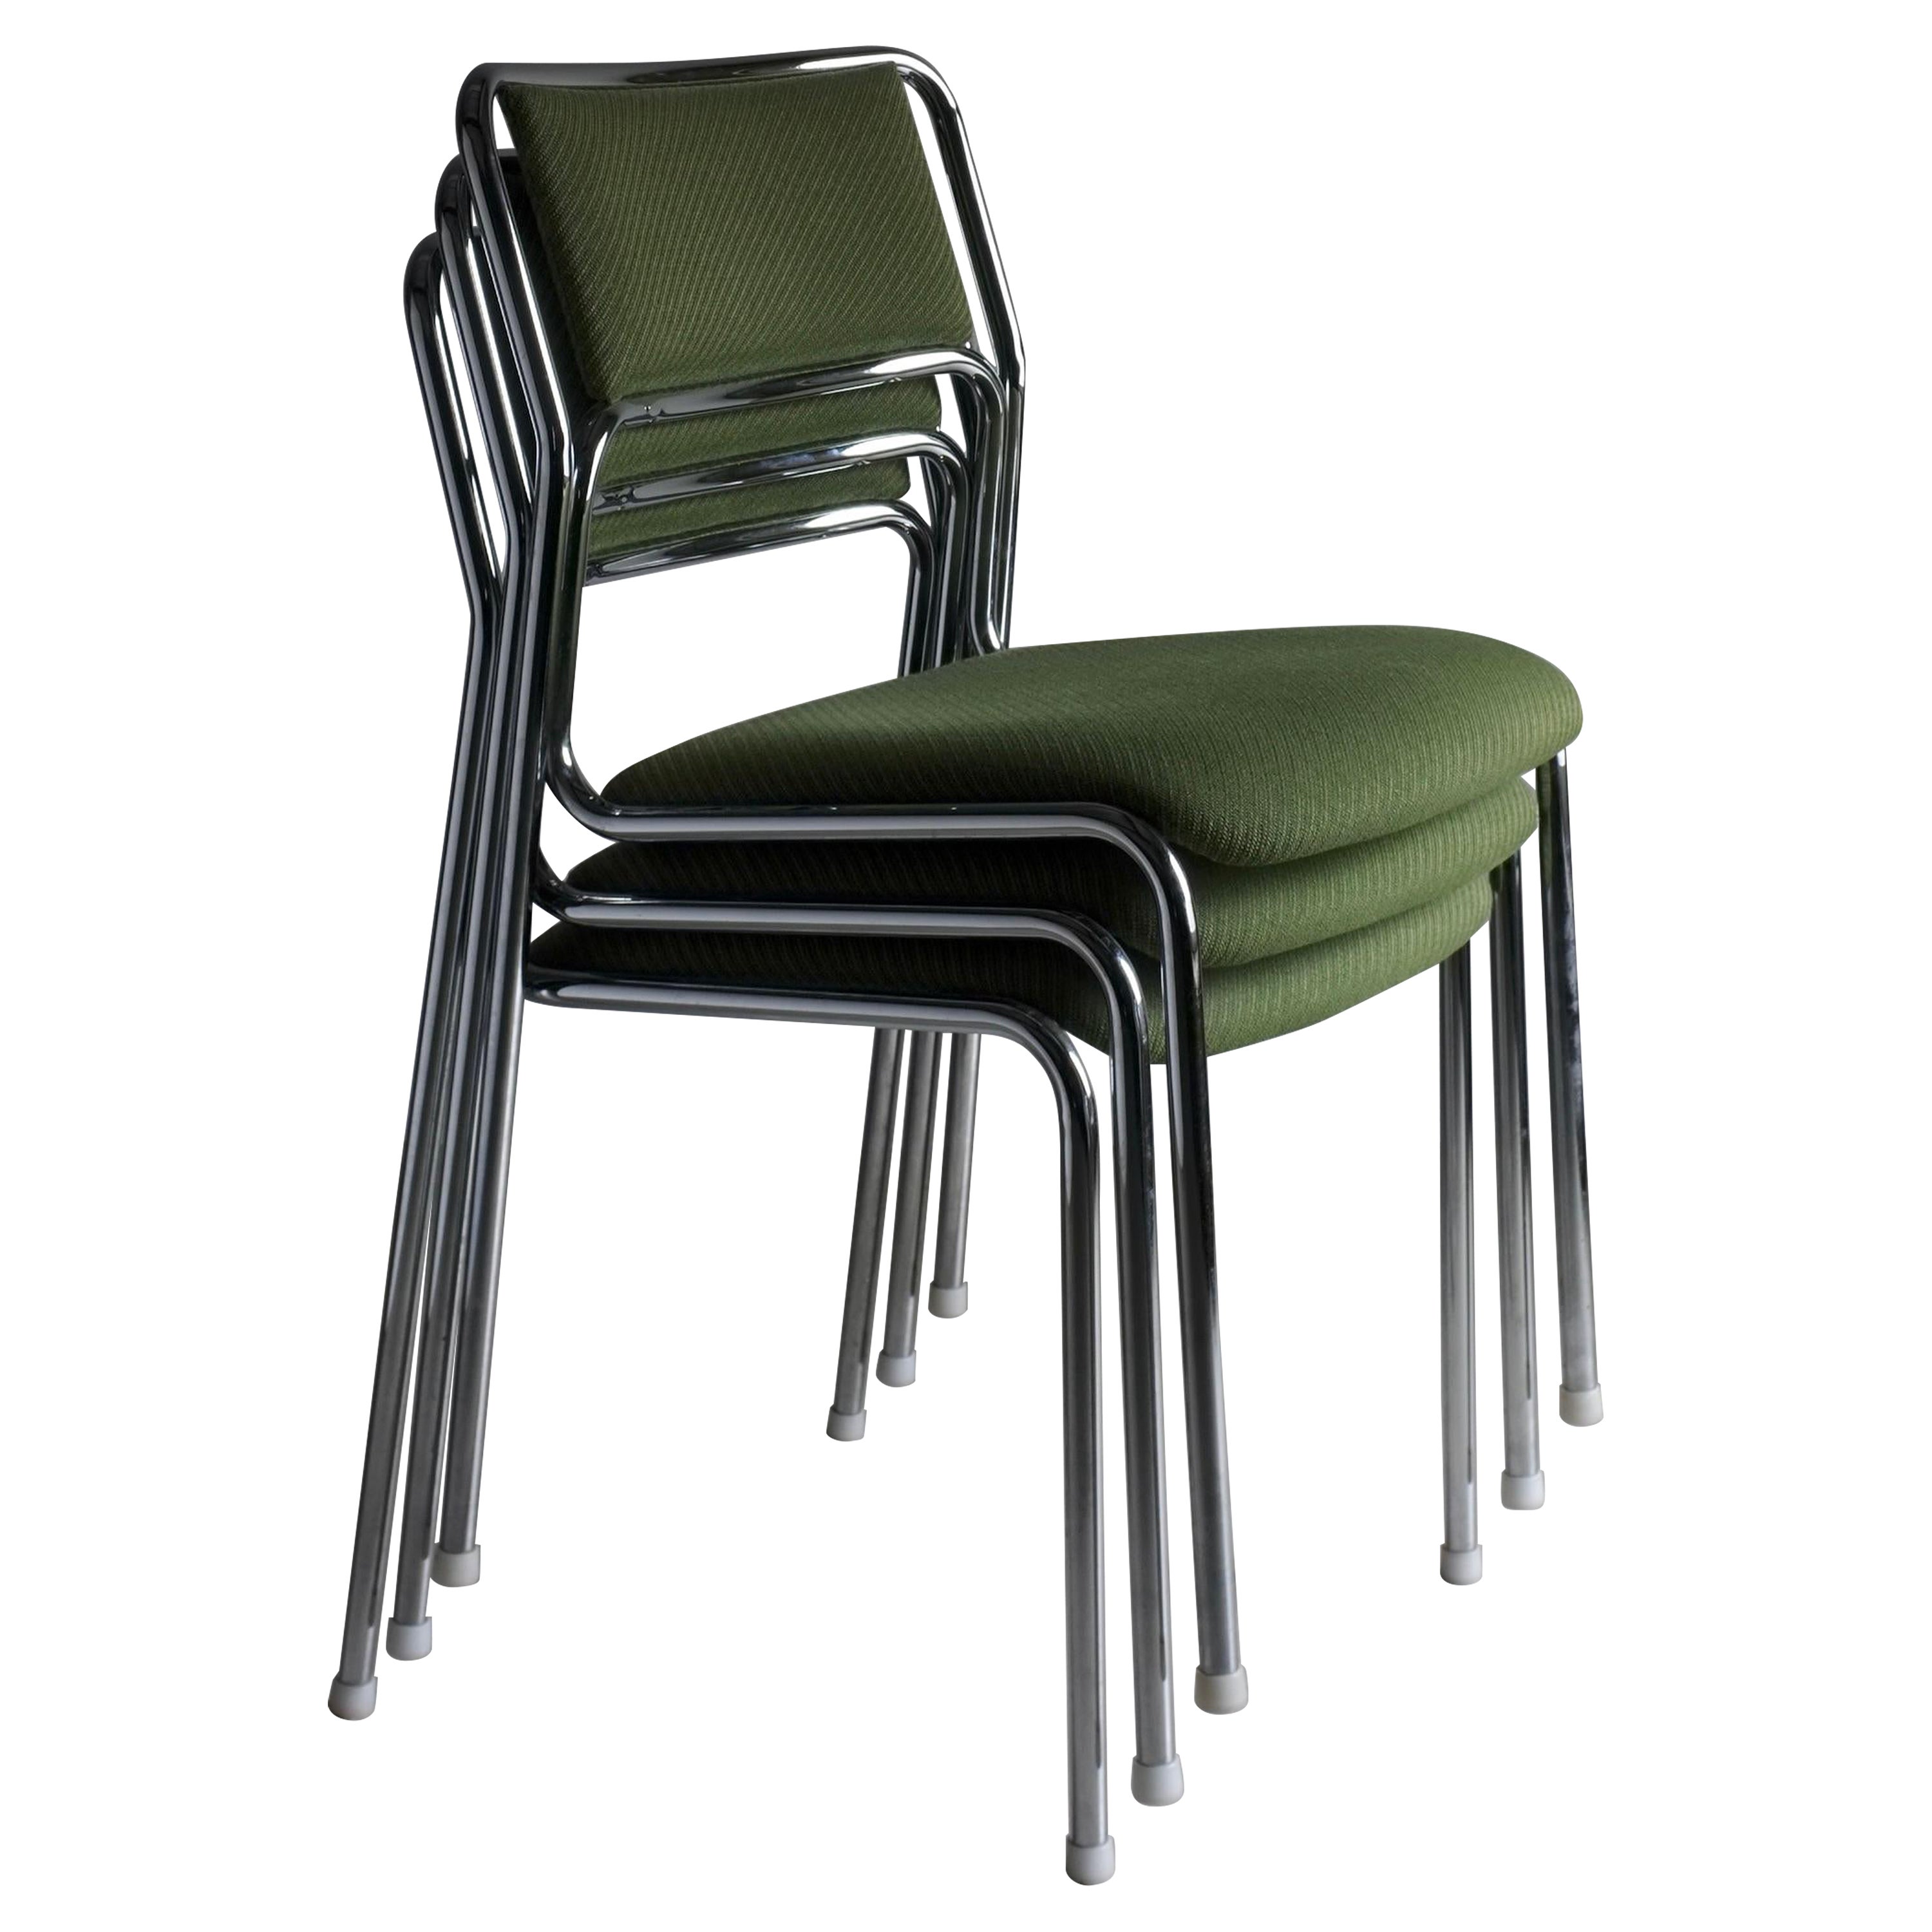 3 Green Tubular Steel Stacking Chairs, Sweden 1970s For Sale